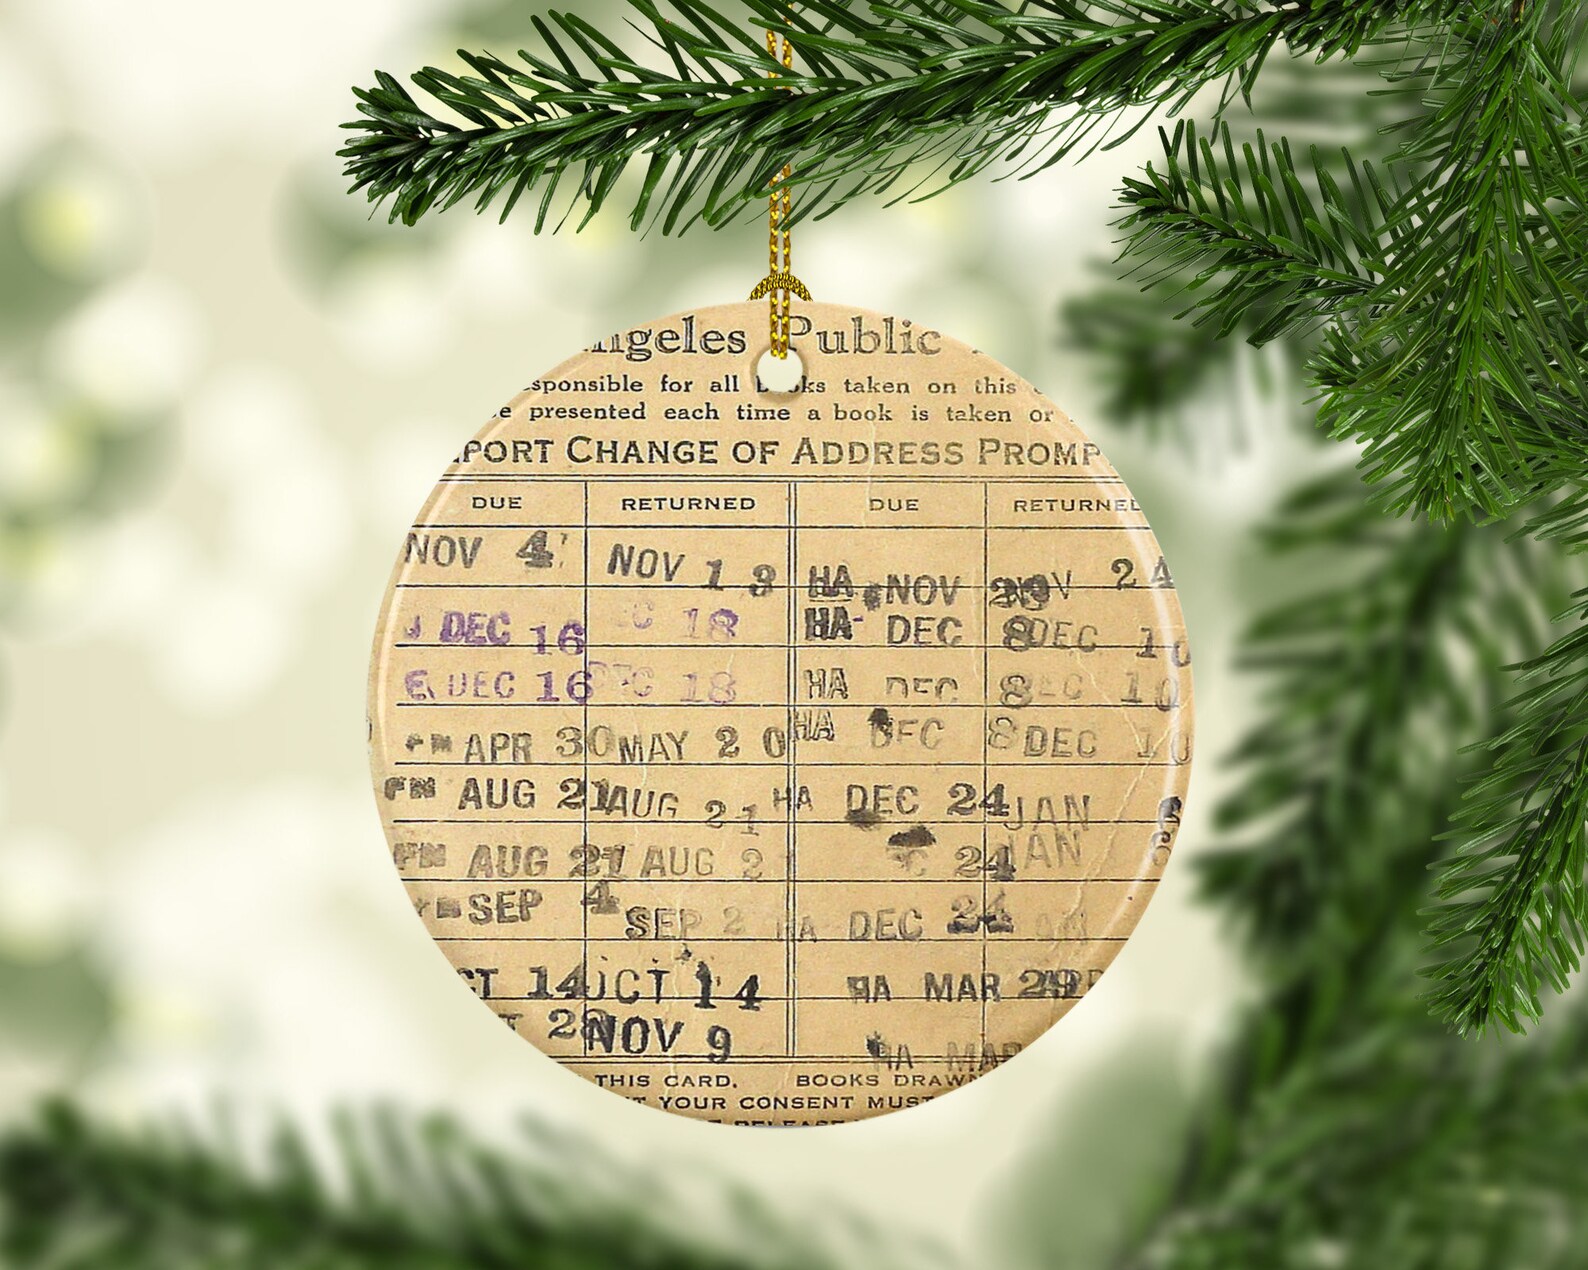 a tree ornament made to look like a vintage library check out card with different due dates
